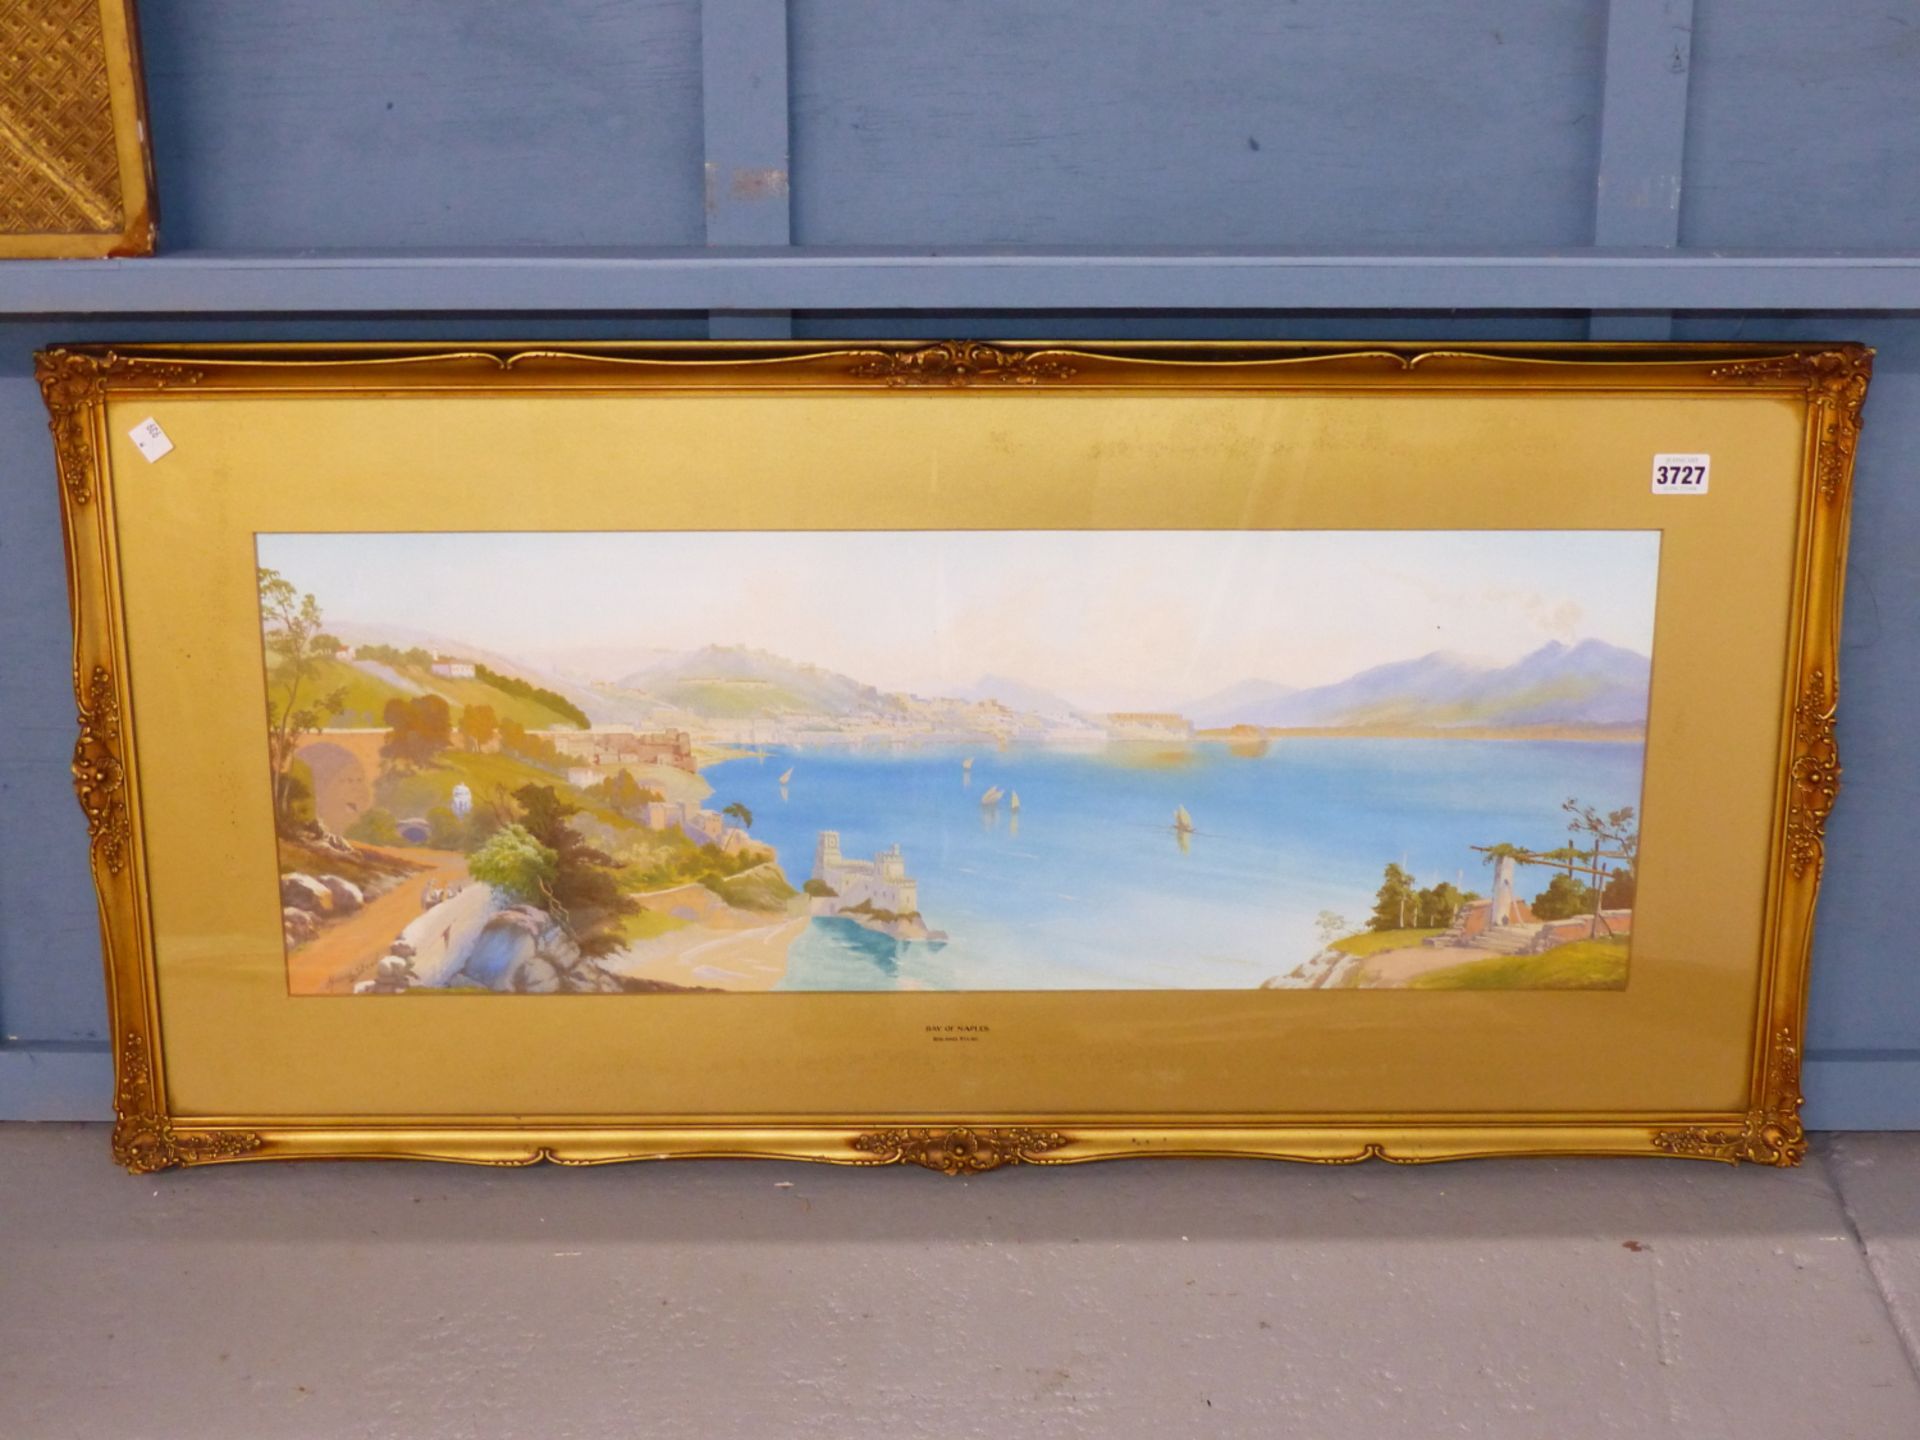 ROLAND STEAD (20TH CENTURY) THE BAY OF NAPLES . WATER COLOUR SIGNED LOWER LEFT. 77 X 26 cm. - Image 2 of 7